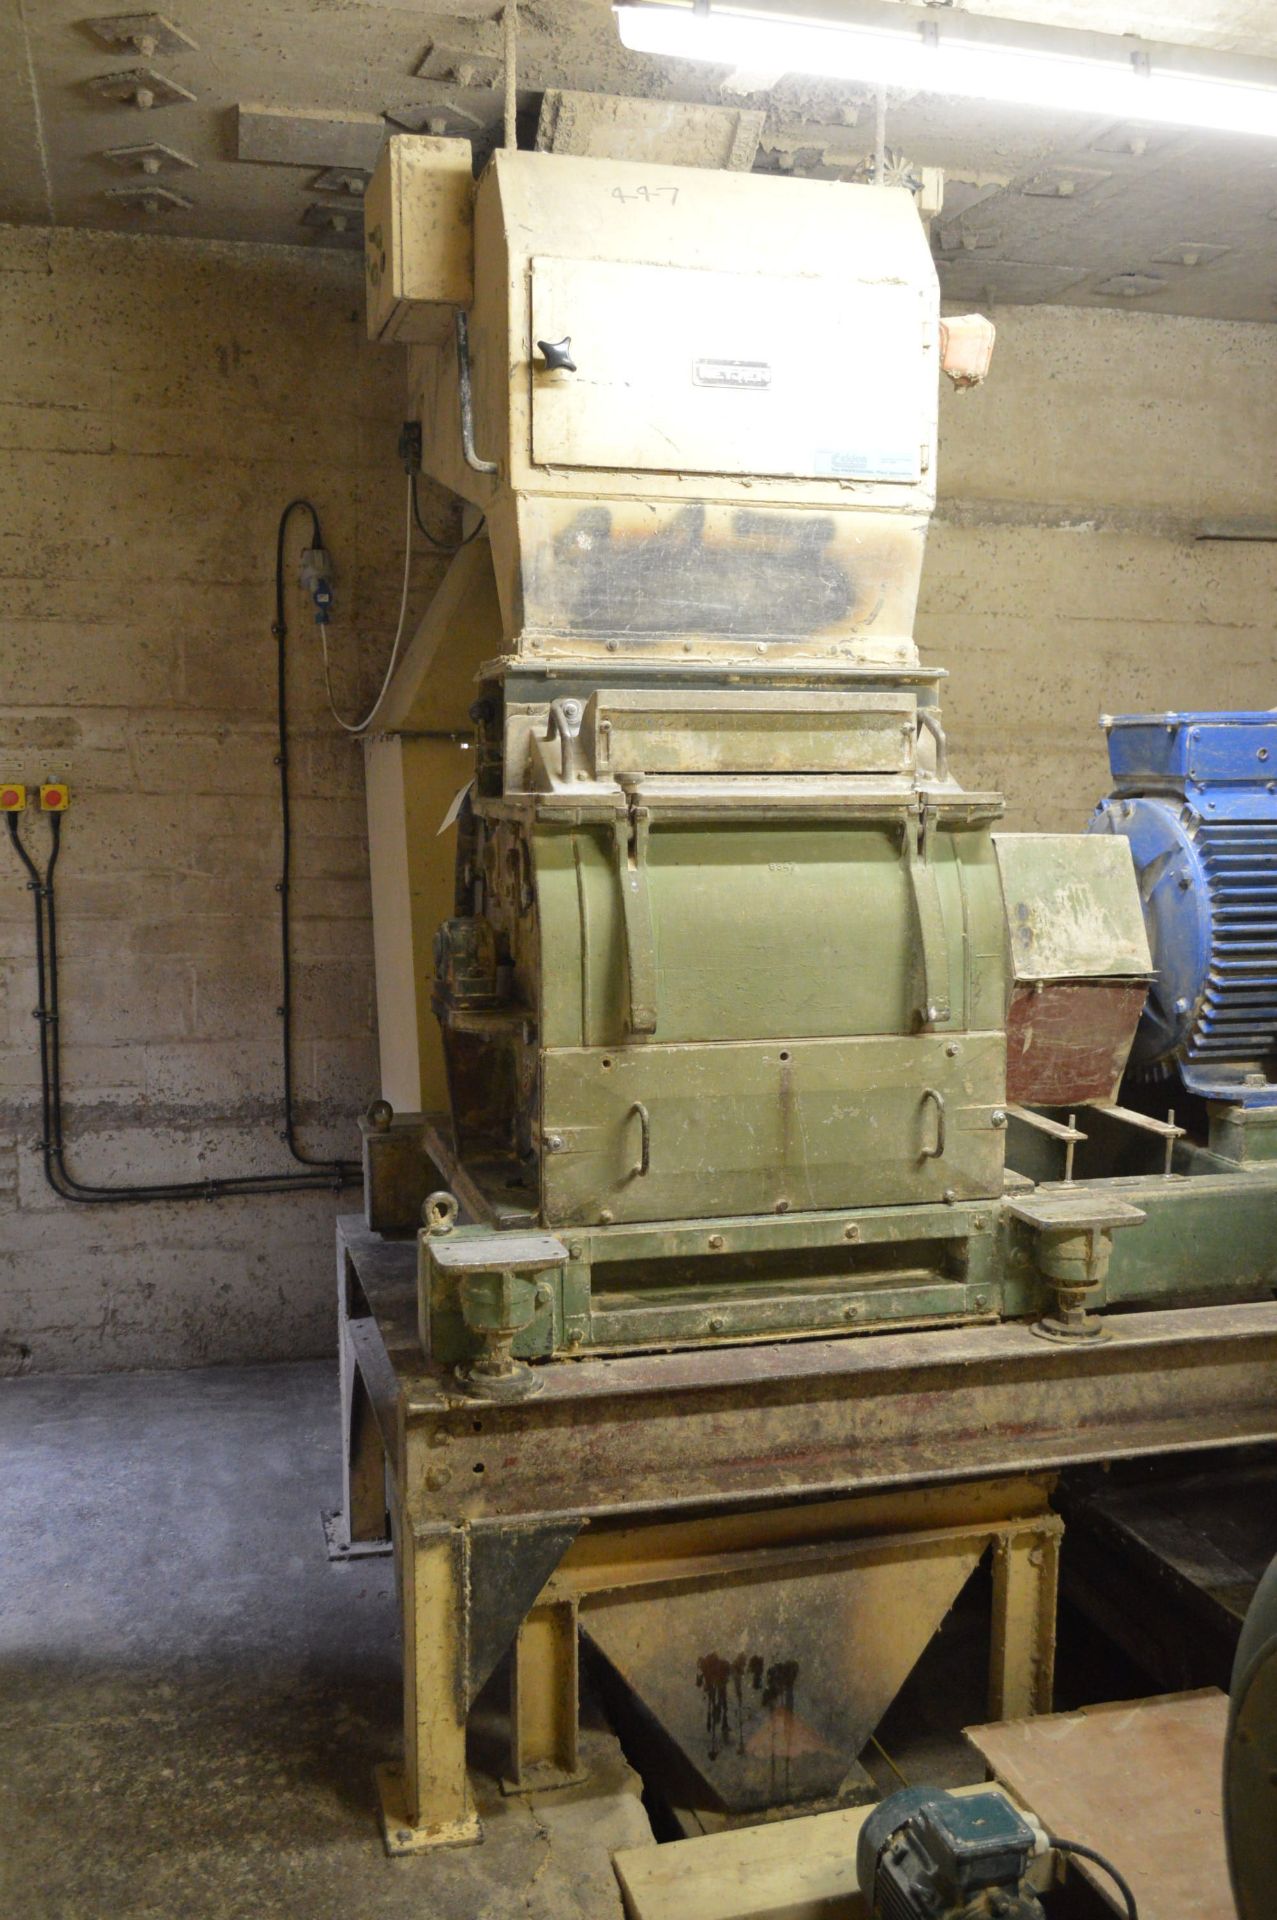 Christy & Norris X26/2 HAMMER MILL GRINDER, with Brook CP 150kW electric motor, 2965rpm, Tietjen